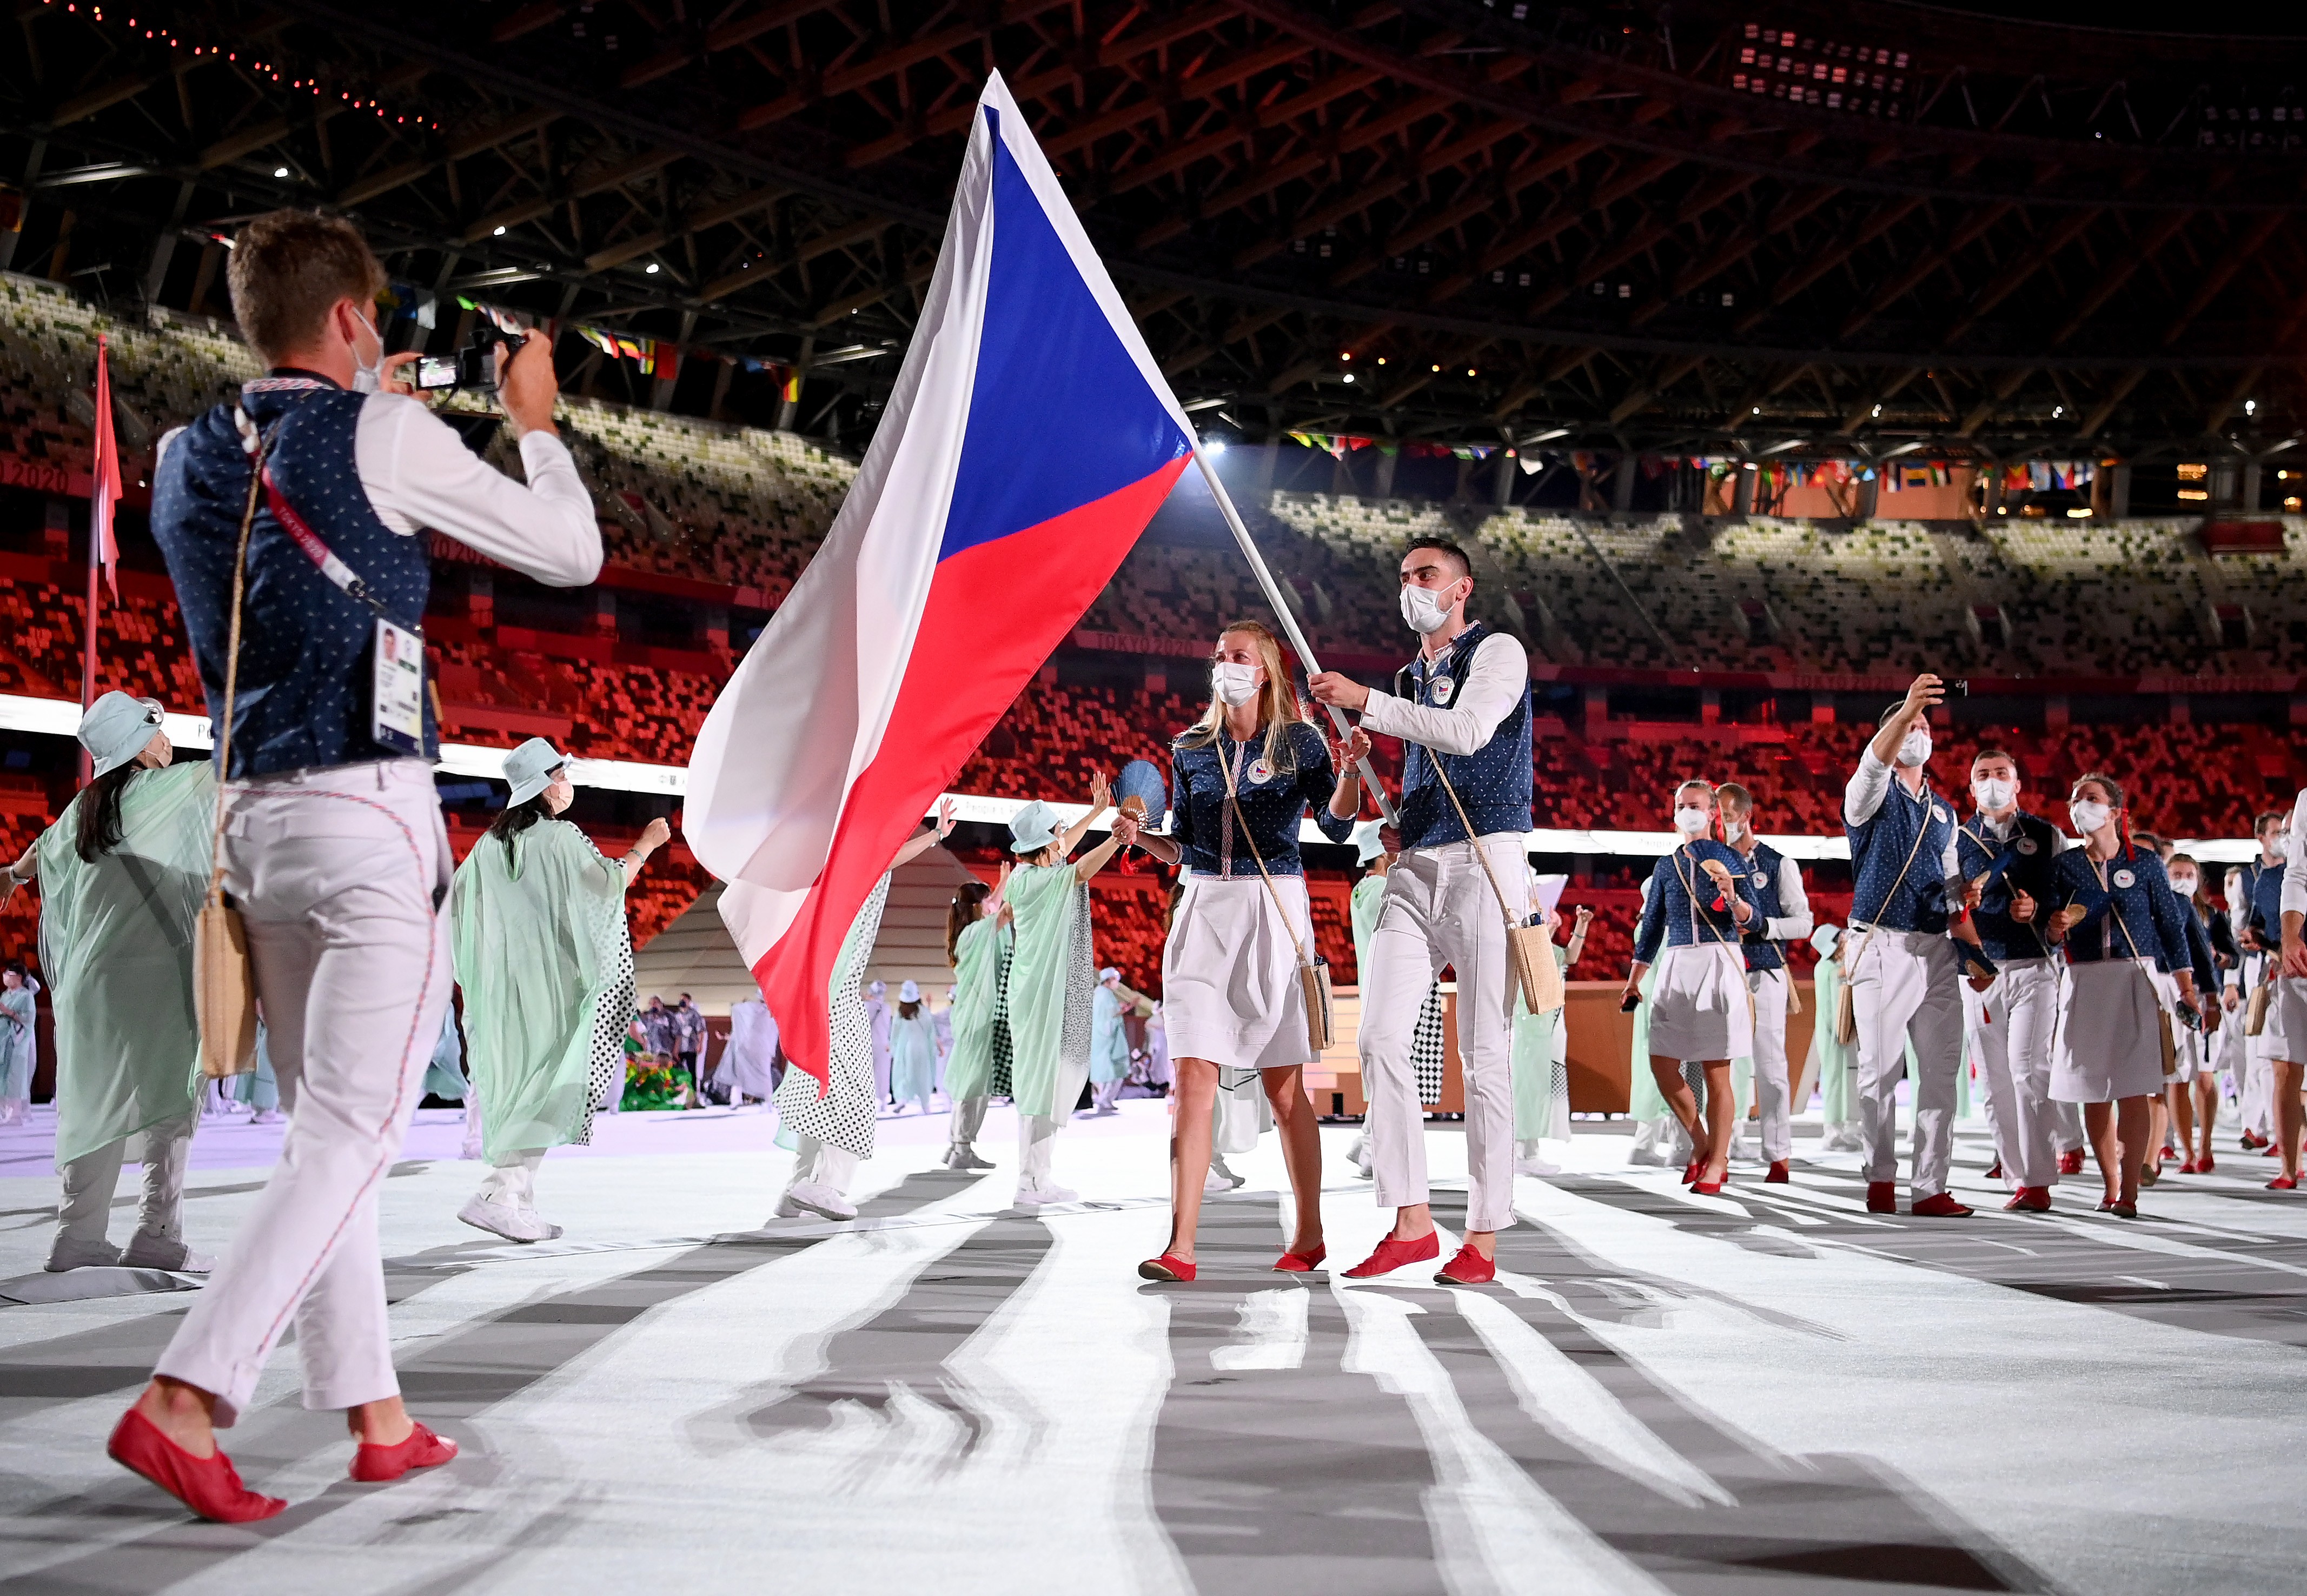 TOKYO, JAPAN - JULY 23: Flag bearers Petra Kvitova and Tomas Satoransky of Team Czech Republic lead their team out during the Opening Ceremony of the Tokyo 2020 Olympic Games at Olympic Stadium on July 23, 2021 in Tokyo, Japan. (Photo by Matthias Hangst/G (Foto: Getty Images)